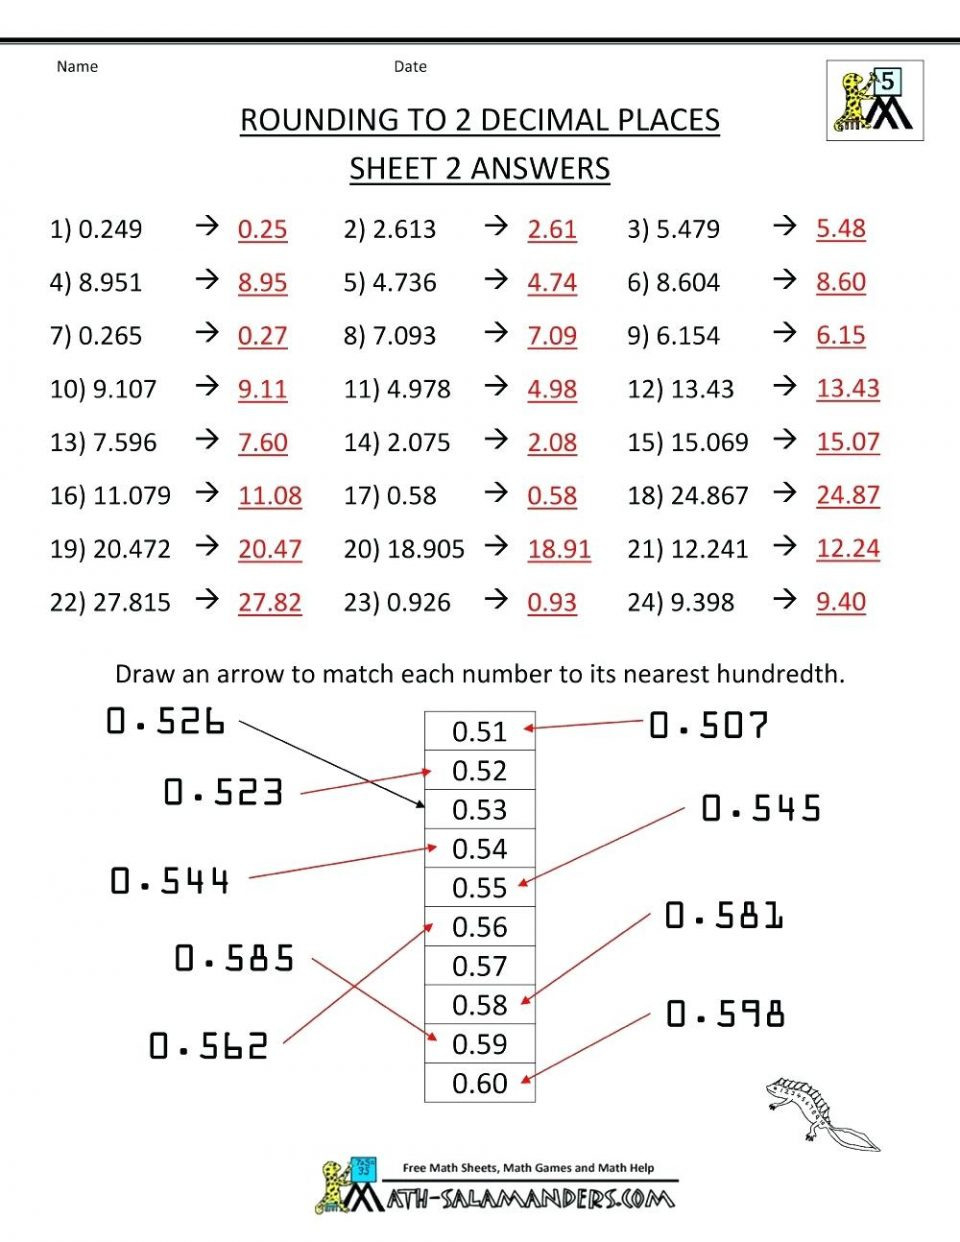 027-free-printable-worksheets-4th-grade-math-word-problems-db-excel